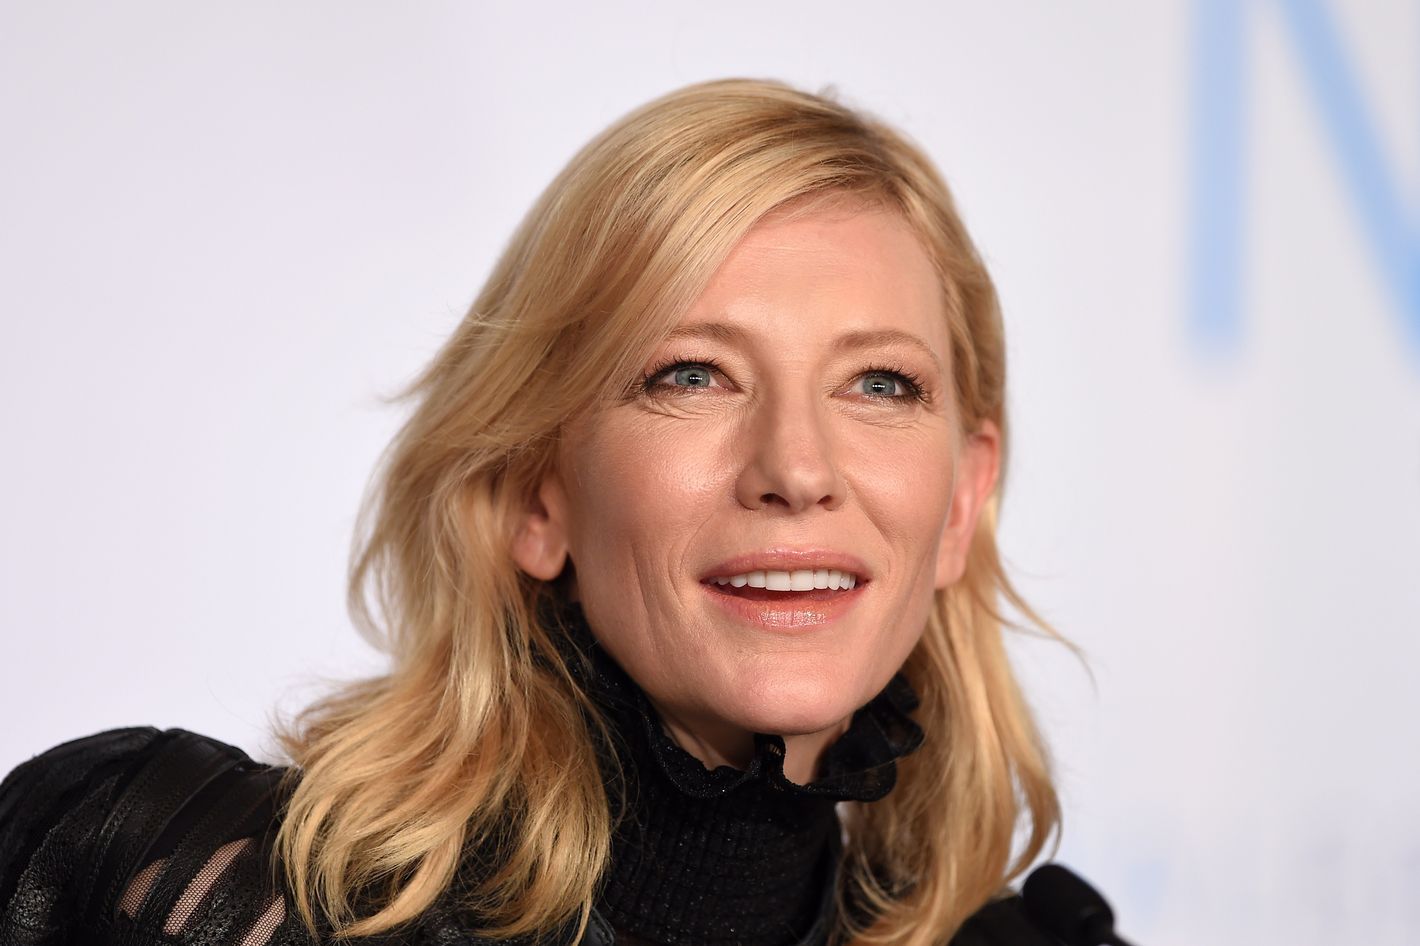 Cate Blanchett on gay marriage, playing a lesbian and speaking out